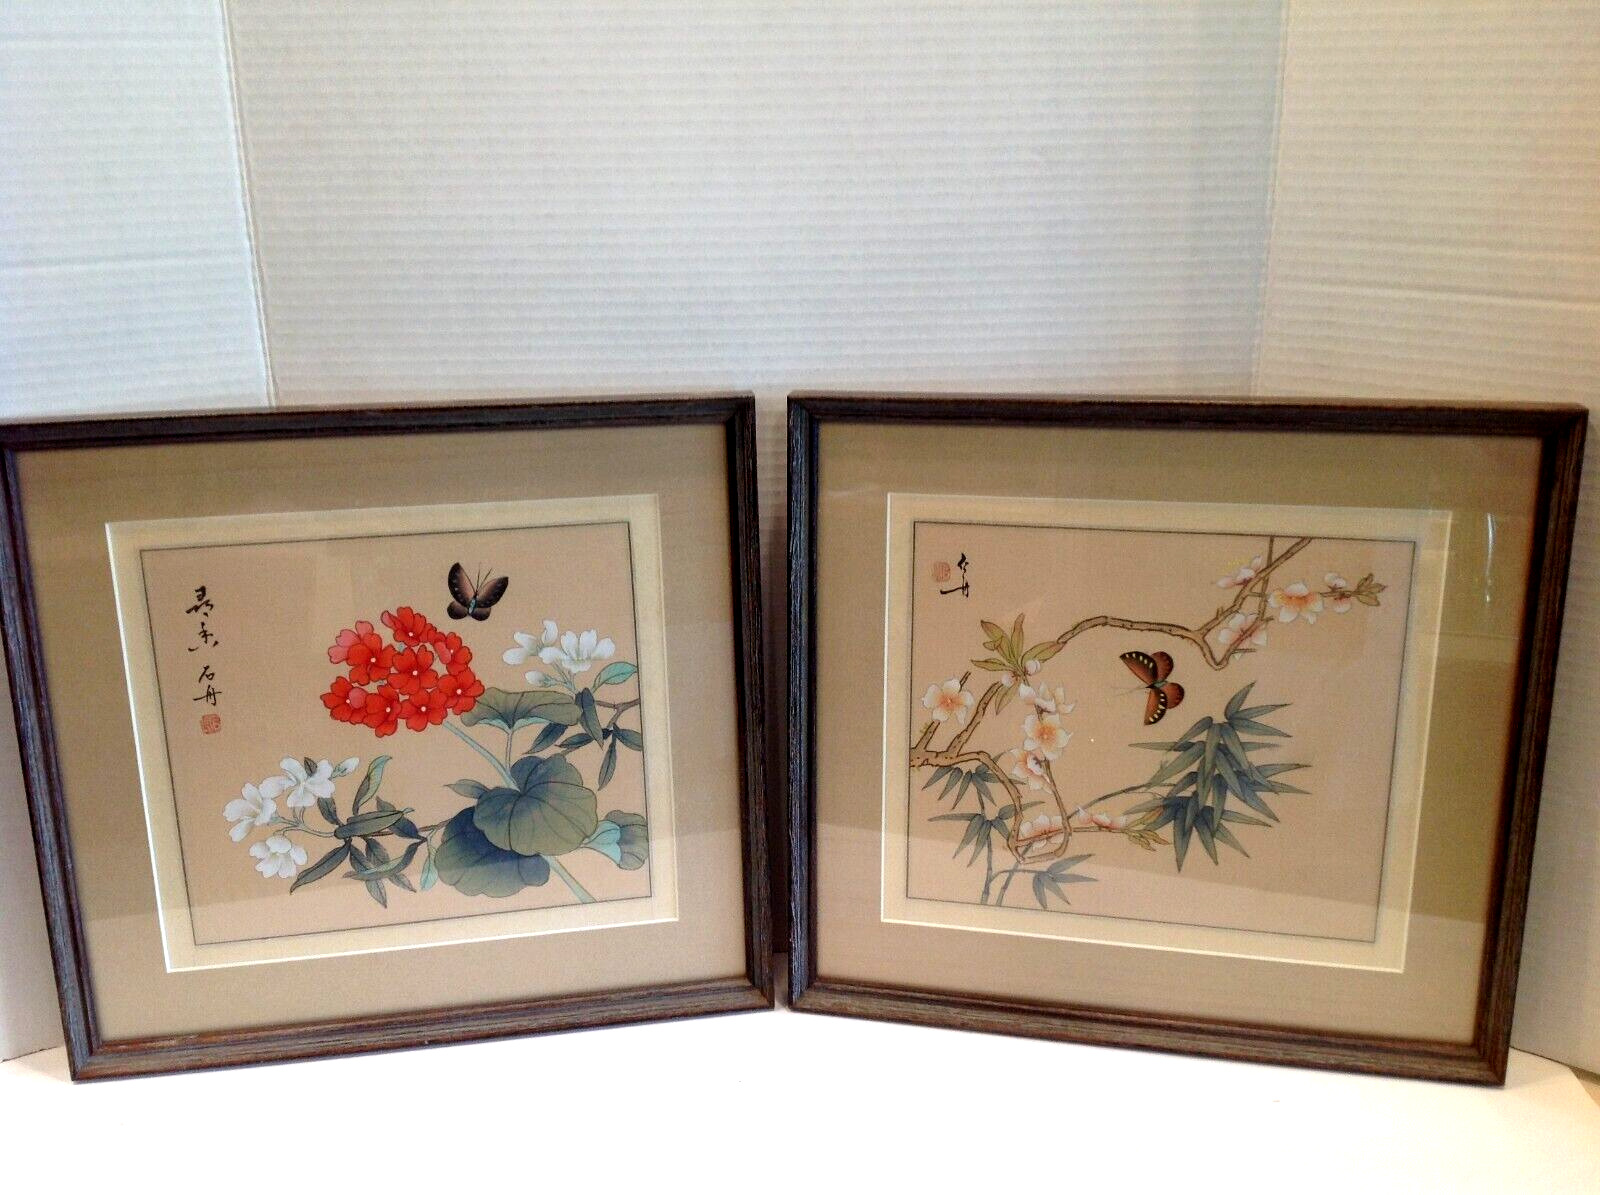 Antique Asian Watercolors on Silk Art Framed and Matted Lot of 2